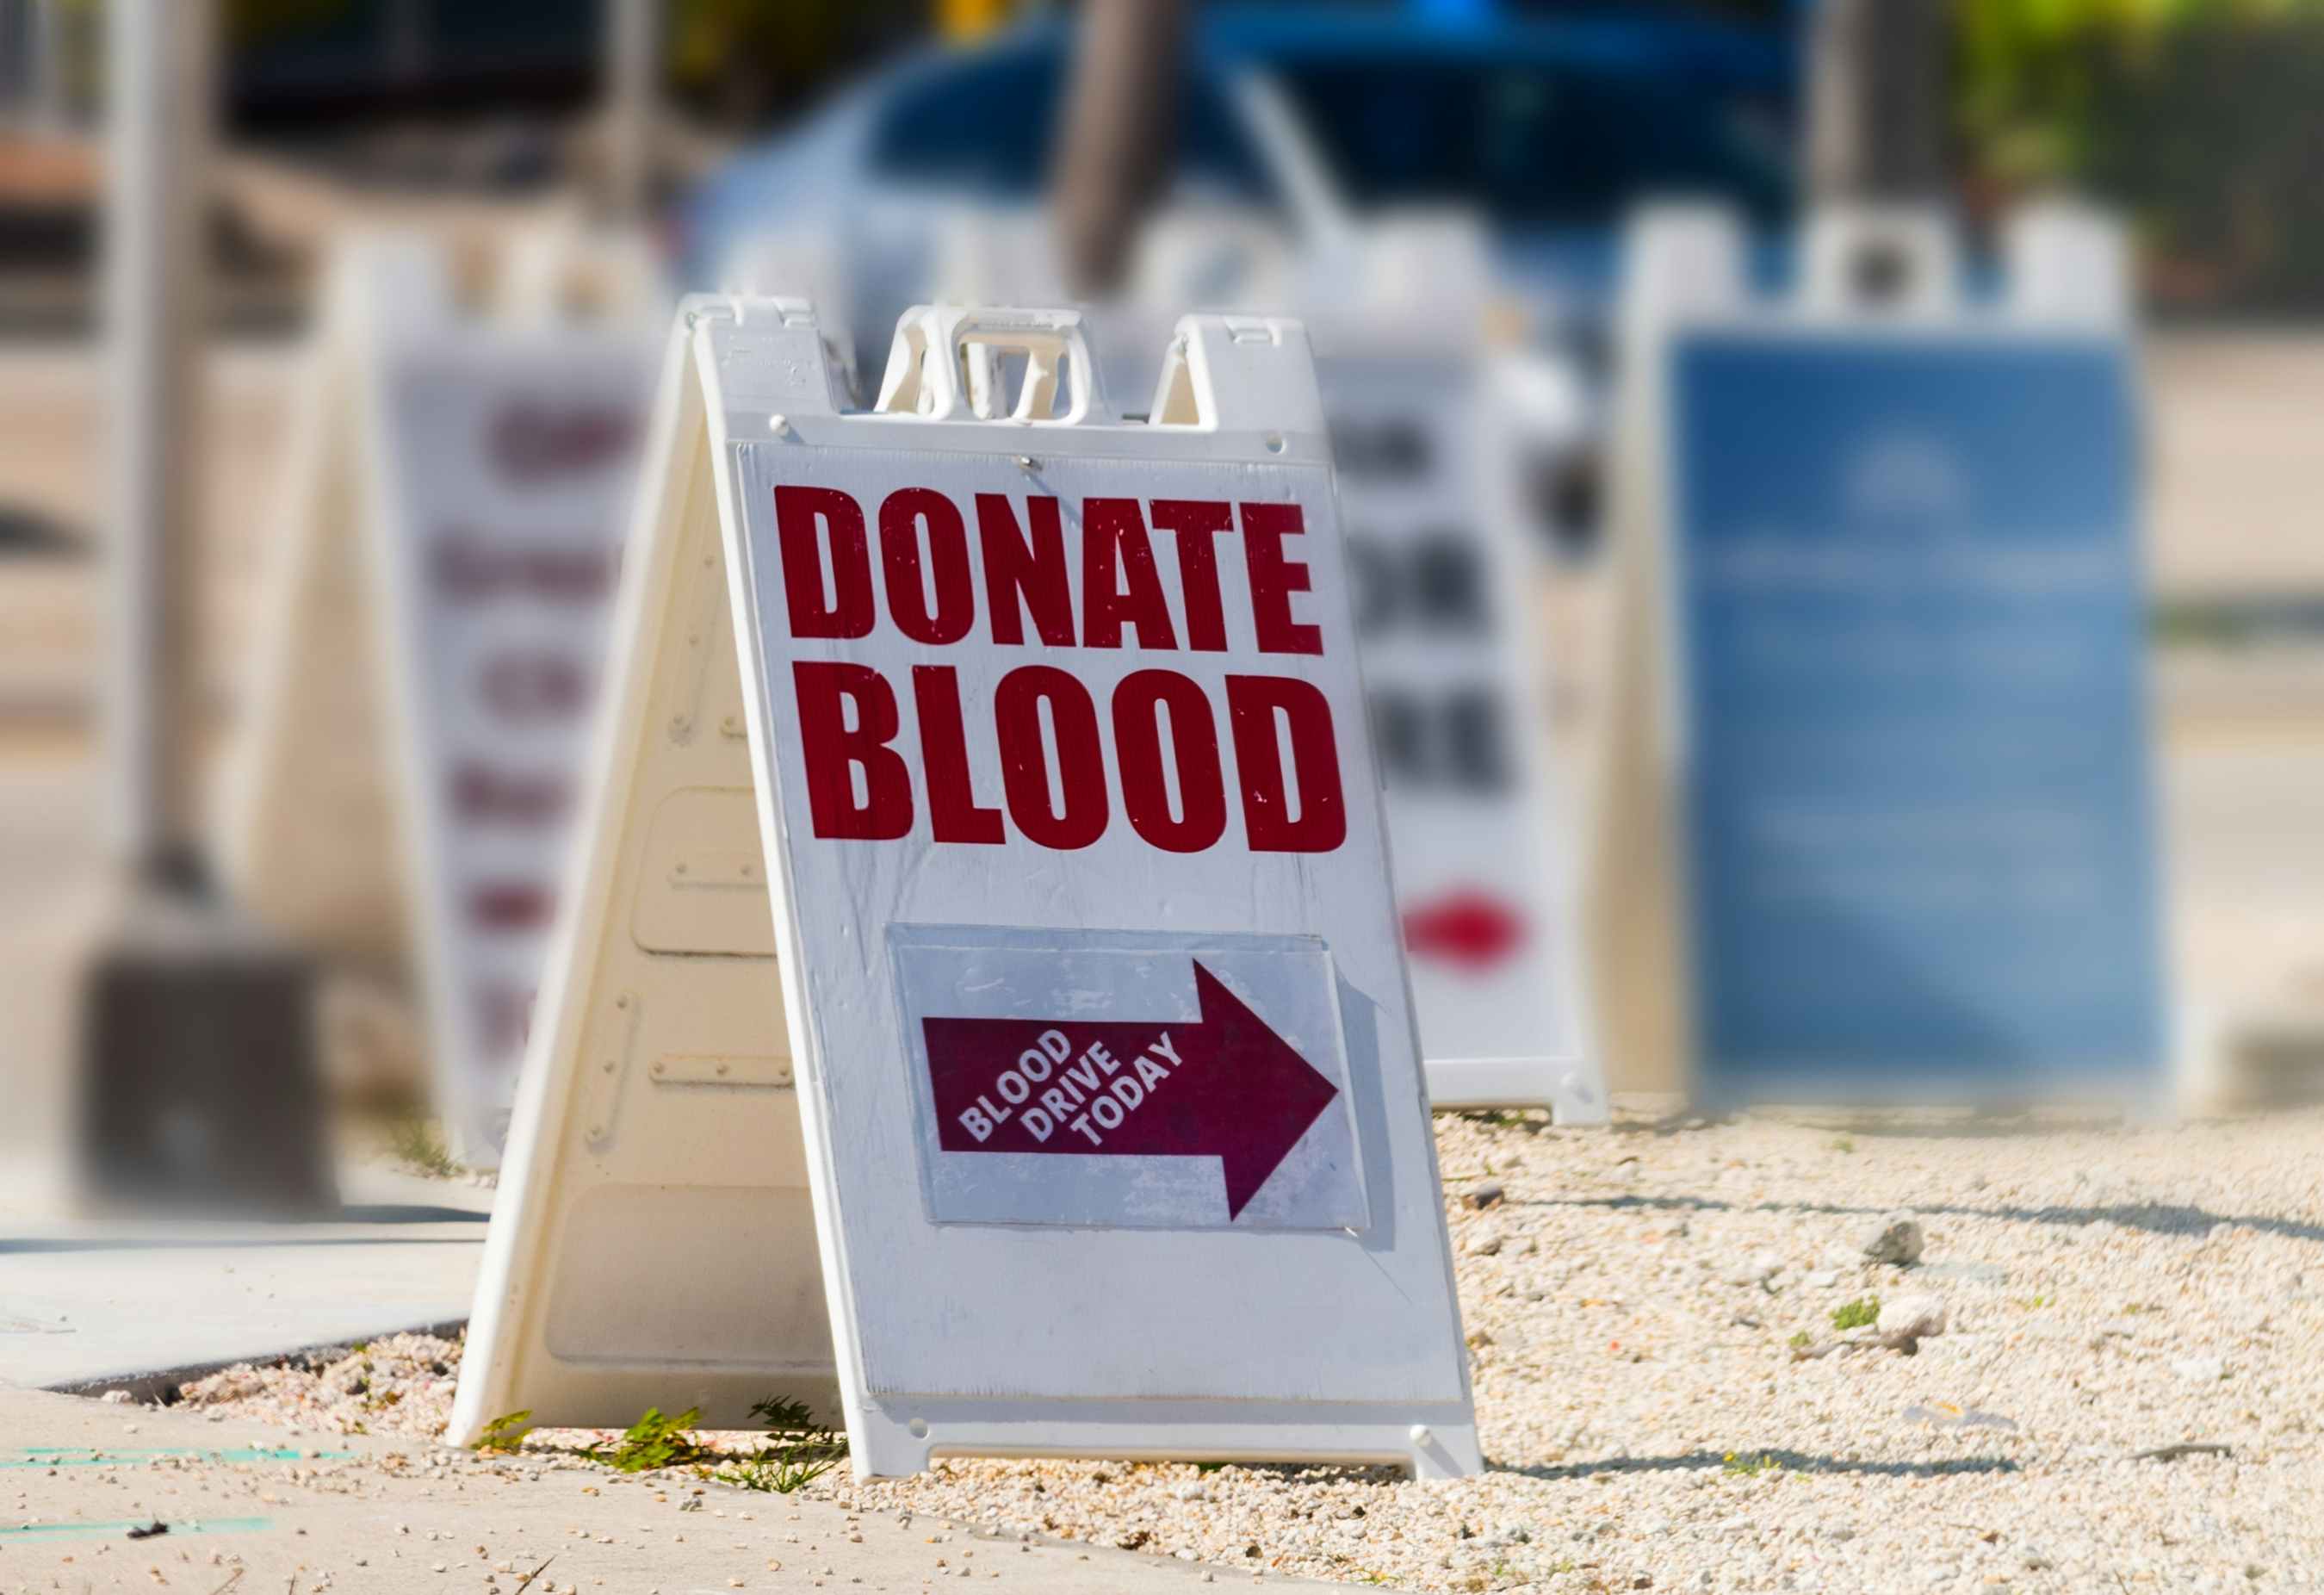 Sign pointing to a blood drive